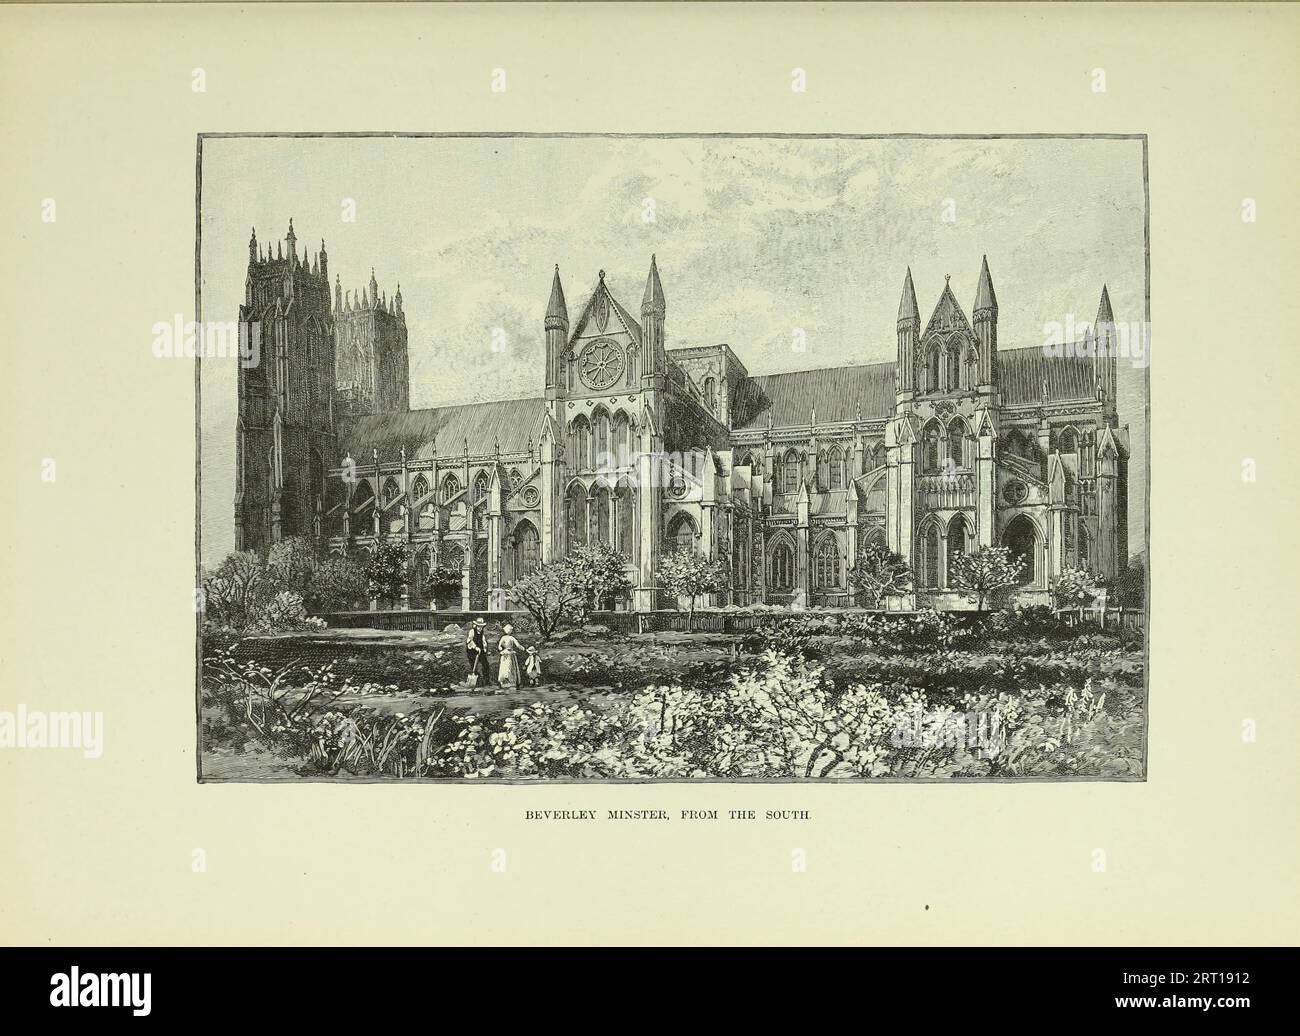 Beverley Minster from the South aus dem Buch Cathedrals, Abbeys and Churches of England and Wales : Descriptive, Historical, Pictorial von Bonney, T. G. (Thomas George), 1833-1923; Publisher London : Cassell 1890 Stockfoto